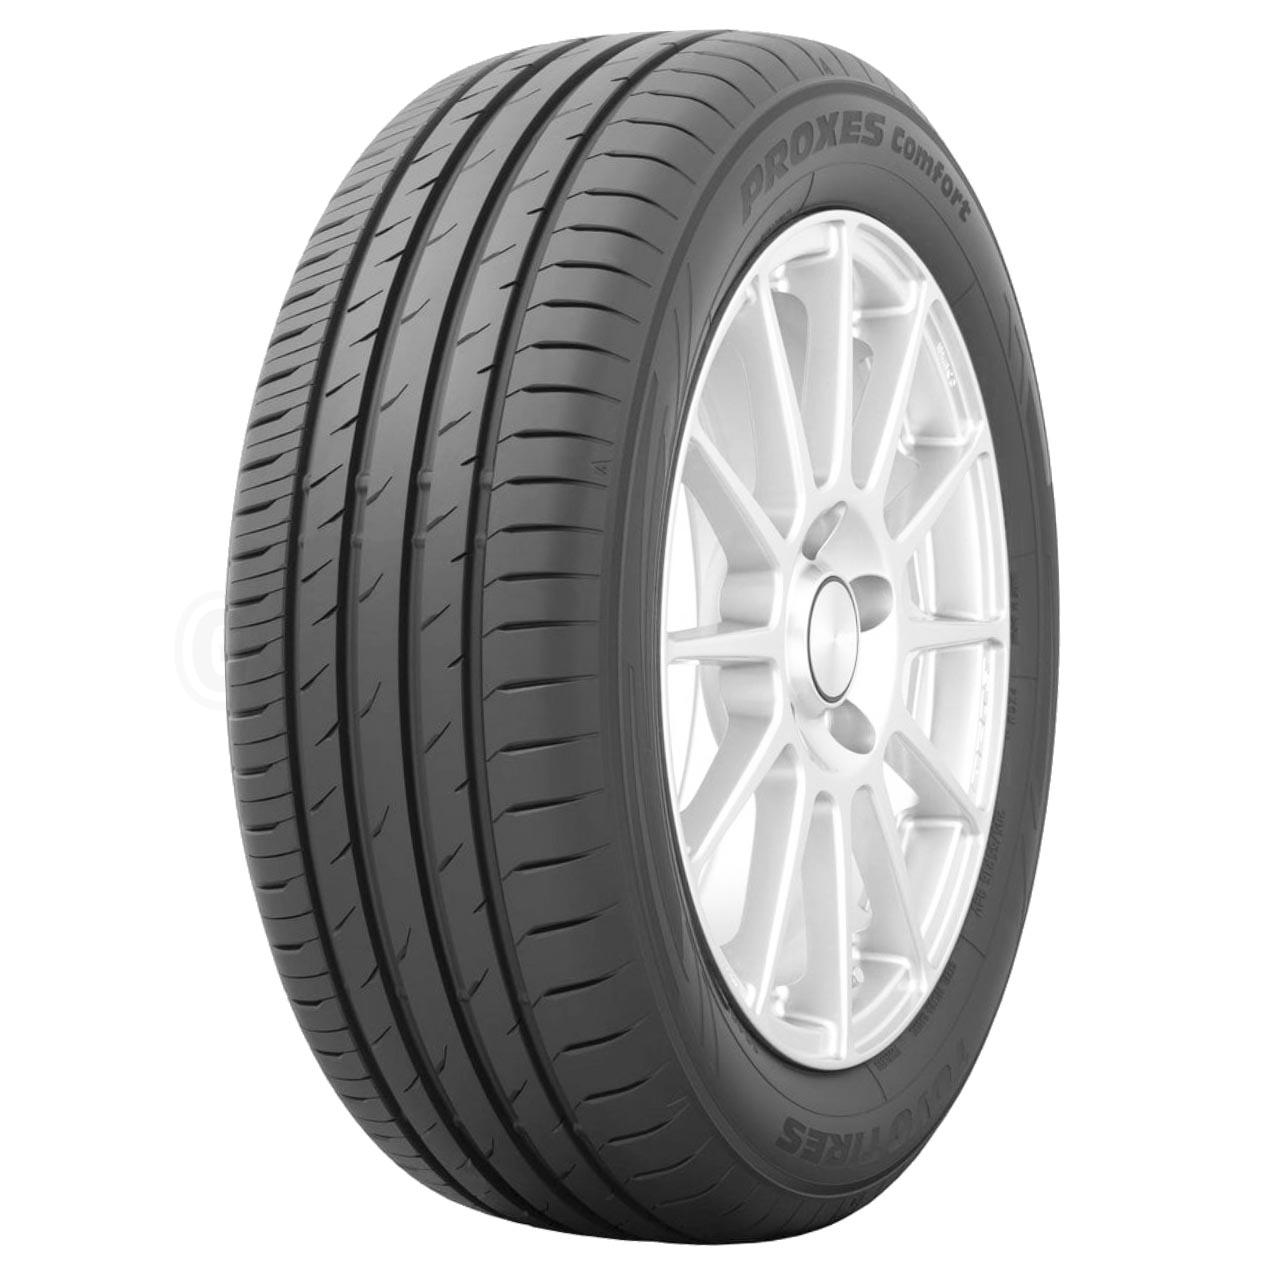 Toyo Proxes Comfort 215/55R16 97W XL